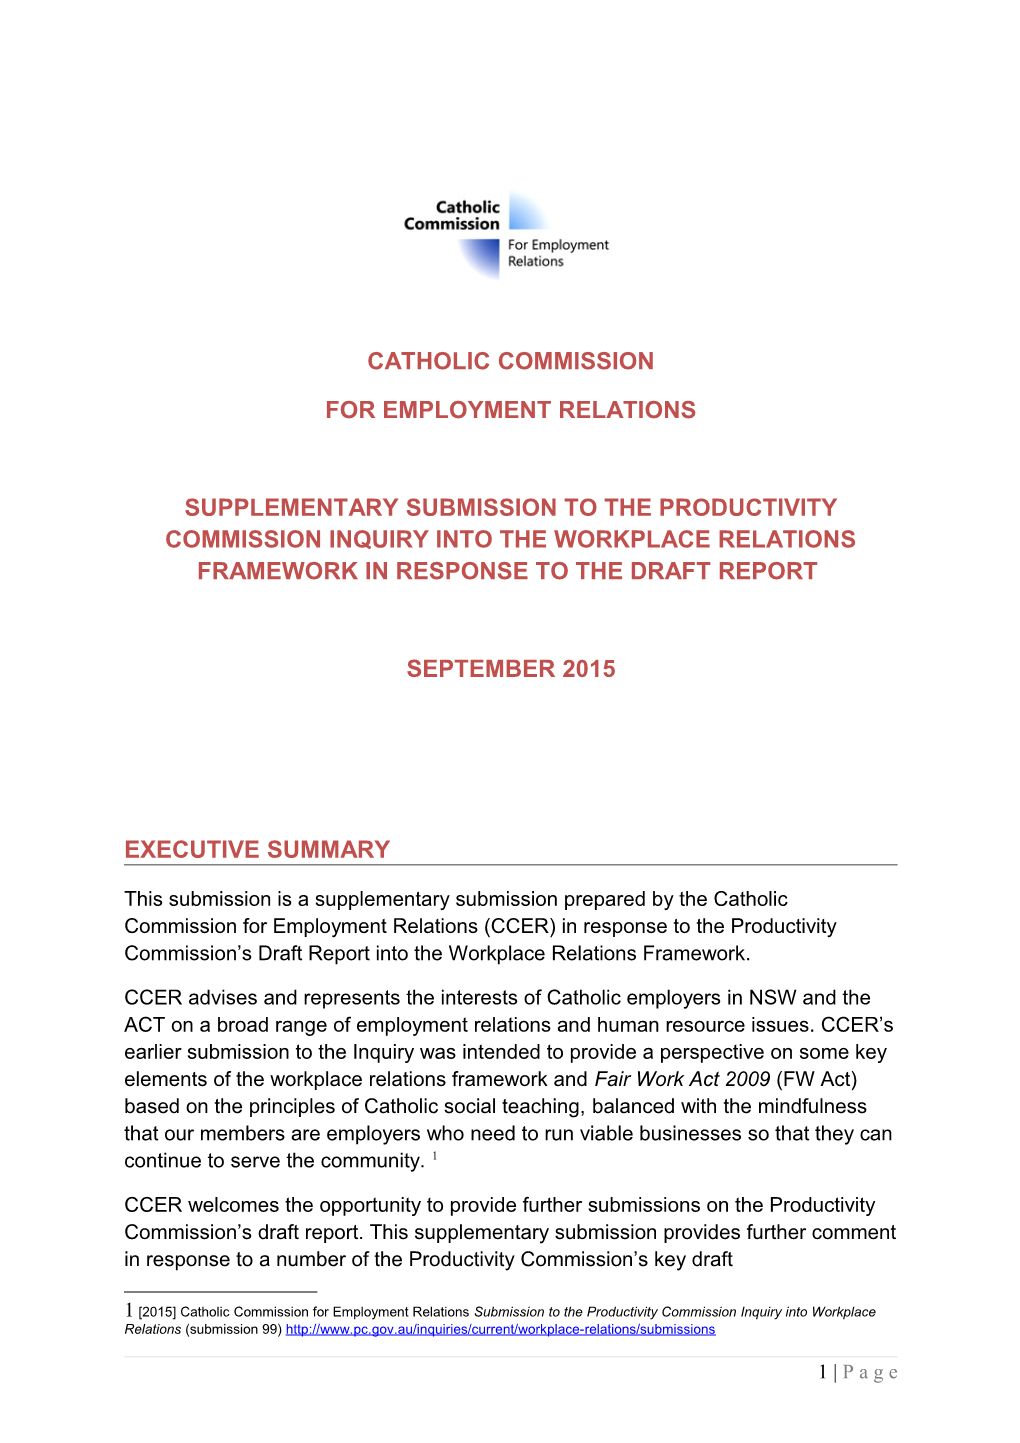 Submission DR289 - Catholic Commission for Employment Relations - Workplace Relations Framework